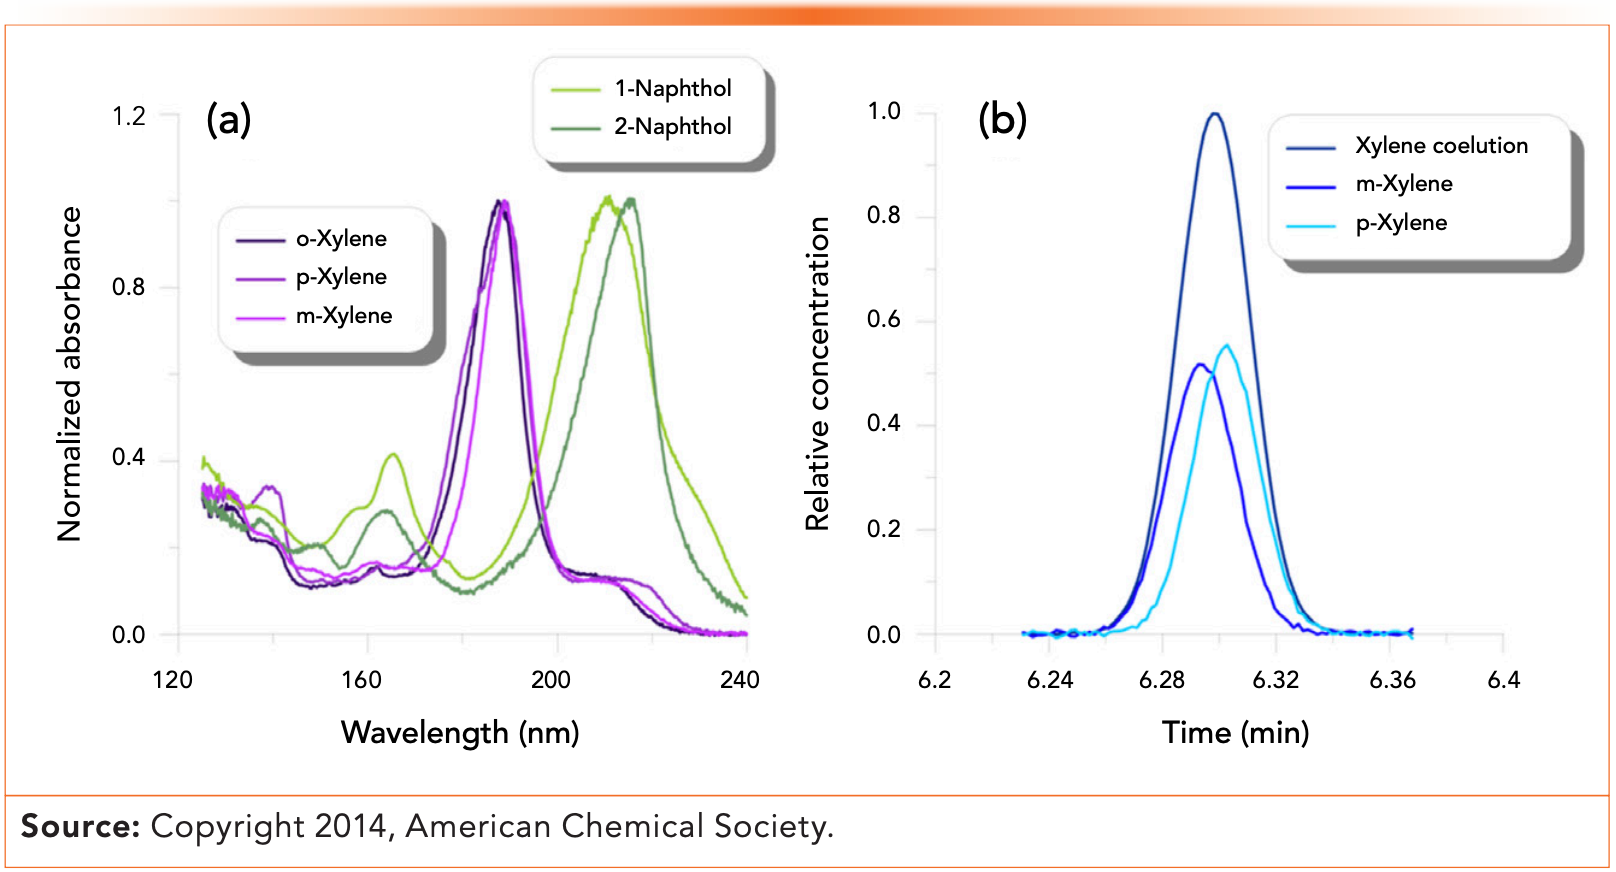 Figure 2: (a) VUV spectra of xylene and naphthol isomers. (b) Chromatogram showing separation of the signals for m- and p-xylene. Reprinted with permission from reference (7).